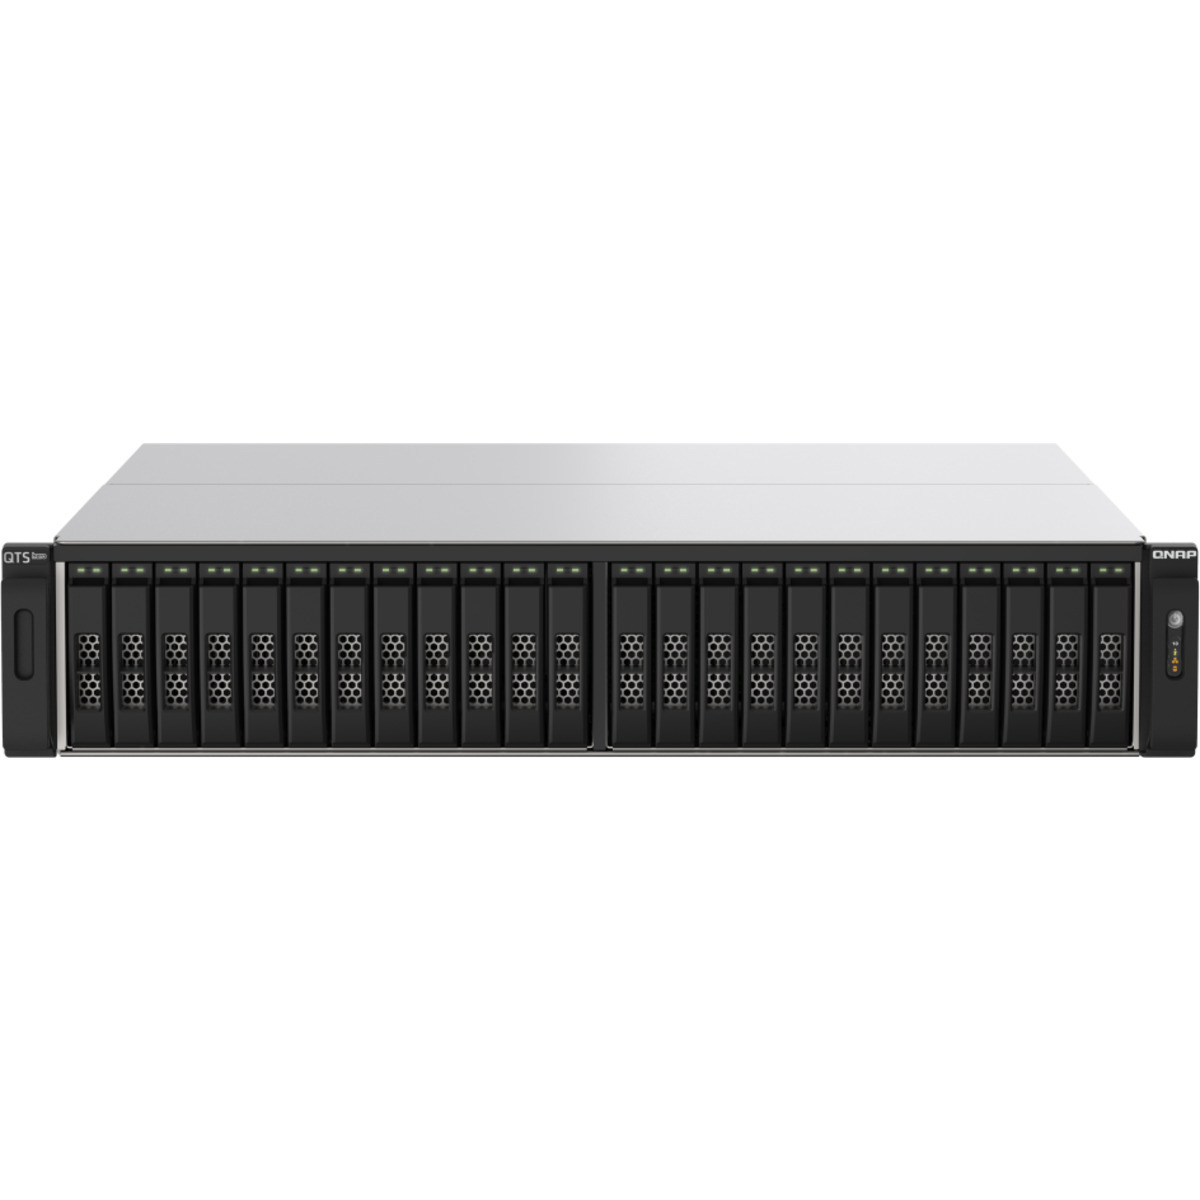 QNAP TS-h2490FU-7302P 21tb 24-Bay RackMount Large Business / Enterprise NAS - Network Attached Storage Device 21x1tb Western Digital Red SN700 WDS100T1R0C  3430/3000MB/s M.2 2280 NVMe SSD NAS Class Drives Installed - Burn-In Tested TS-h2490FU-7302P